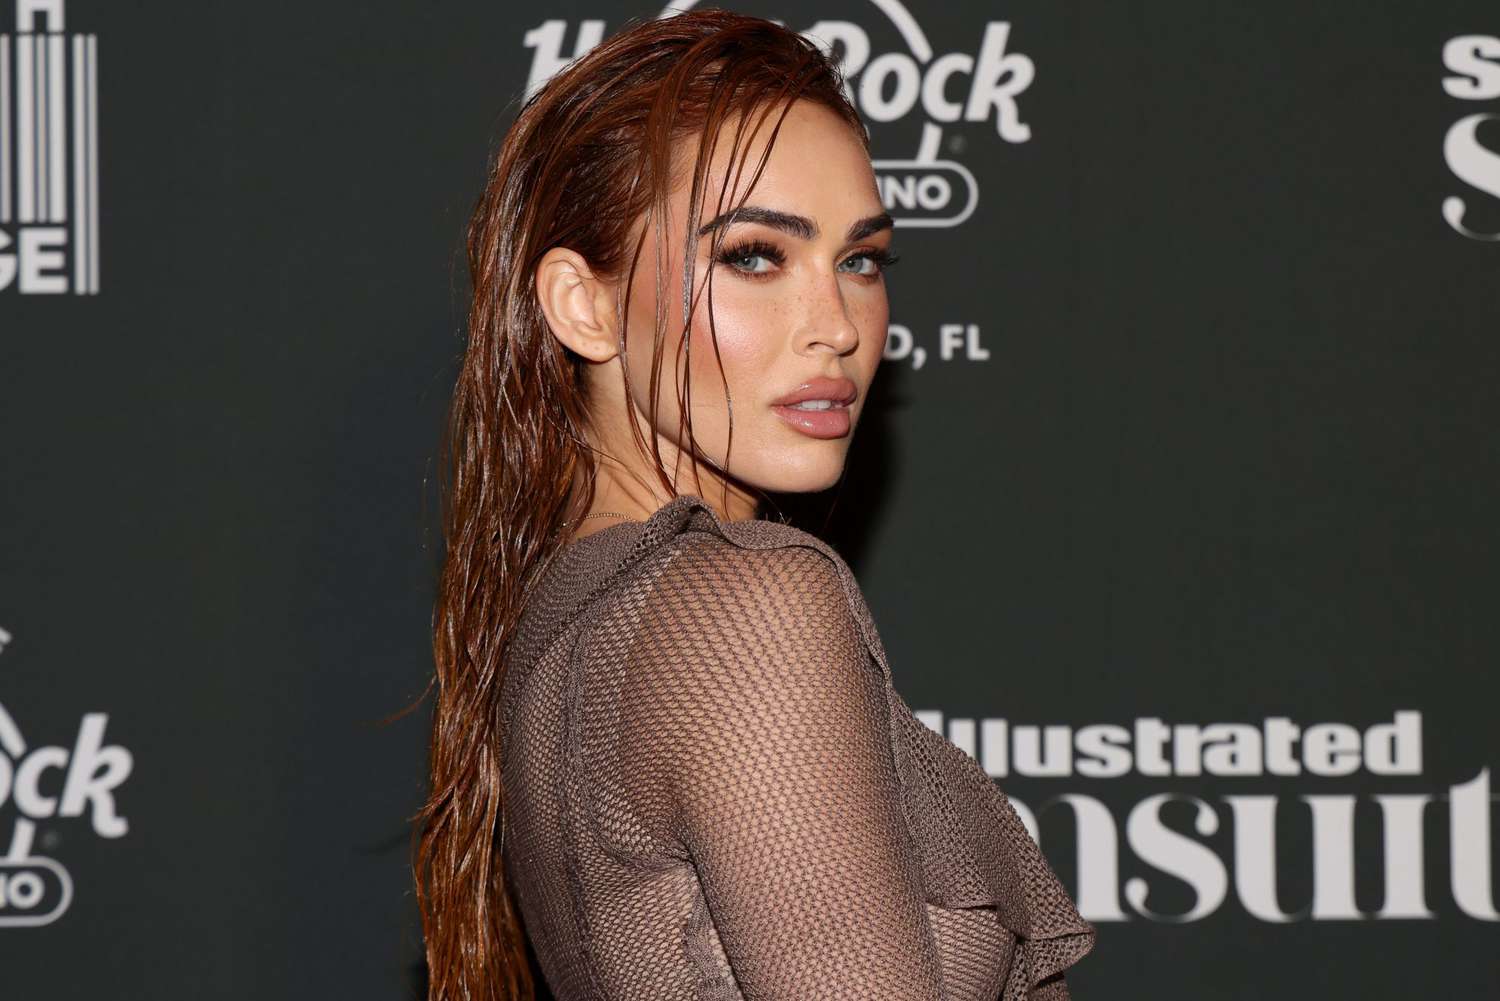 Megan Fox slams claim her kids are ‘forced’ to wear ‘girls’ clothes’